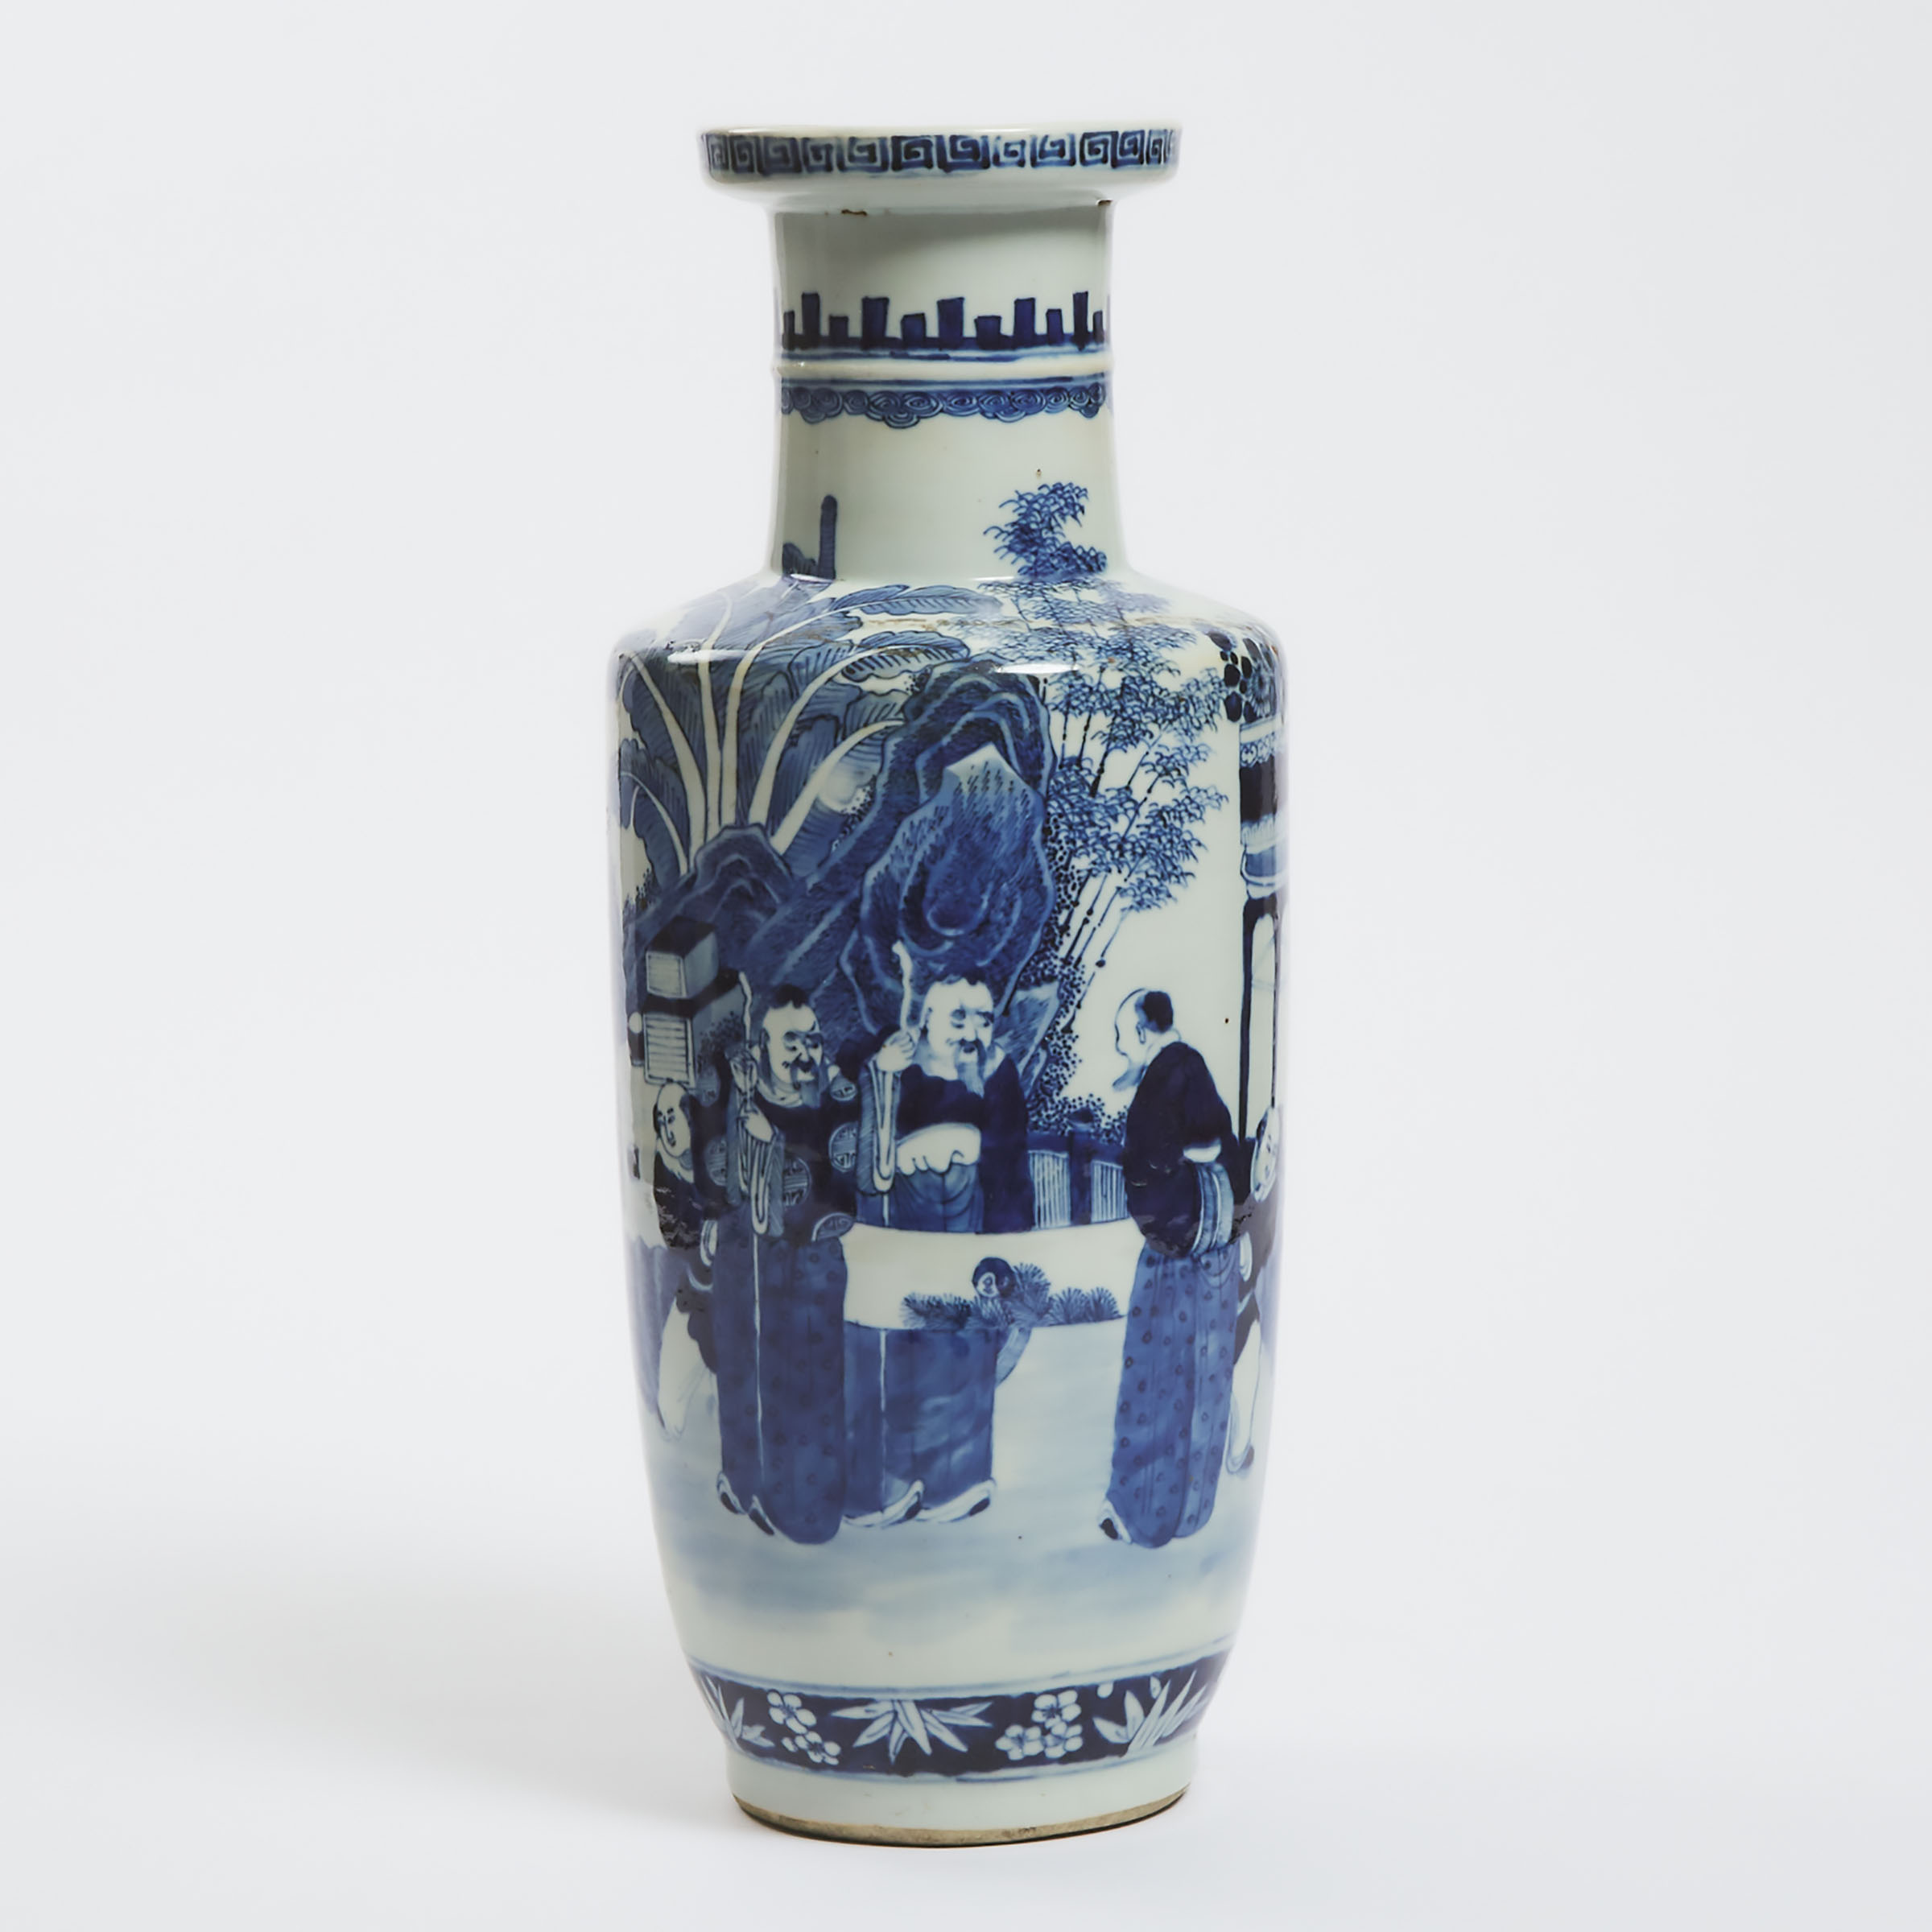 A Blue and White Figural Vase, Early